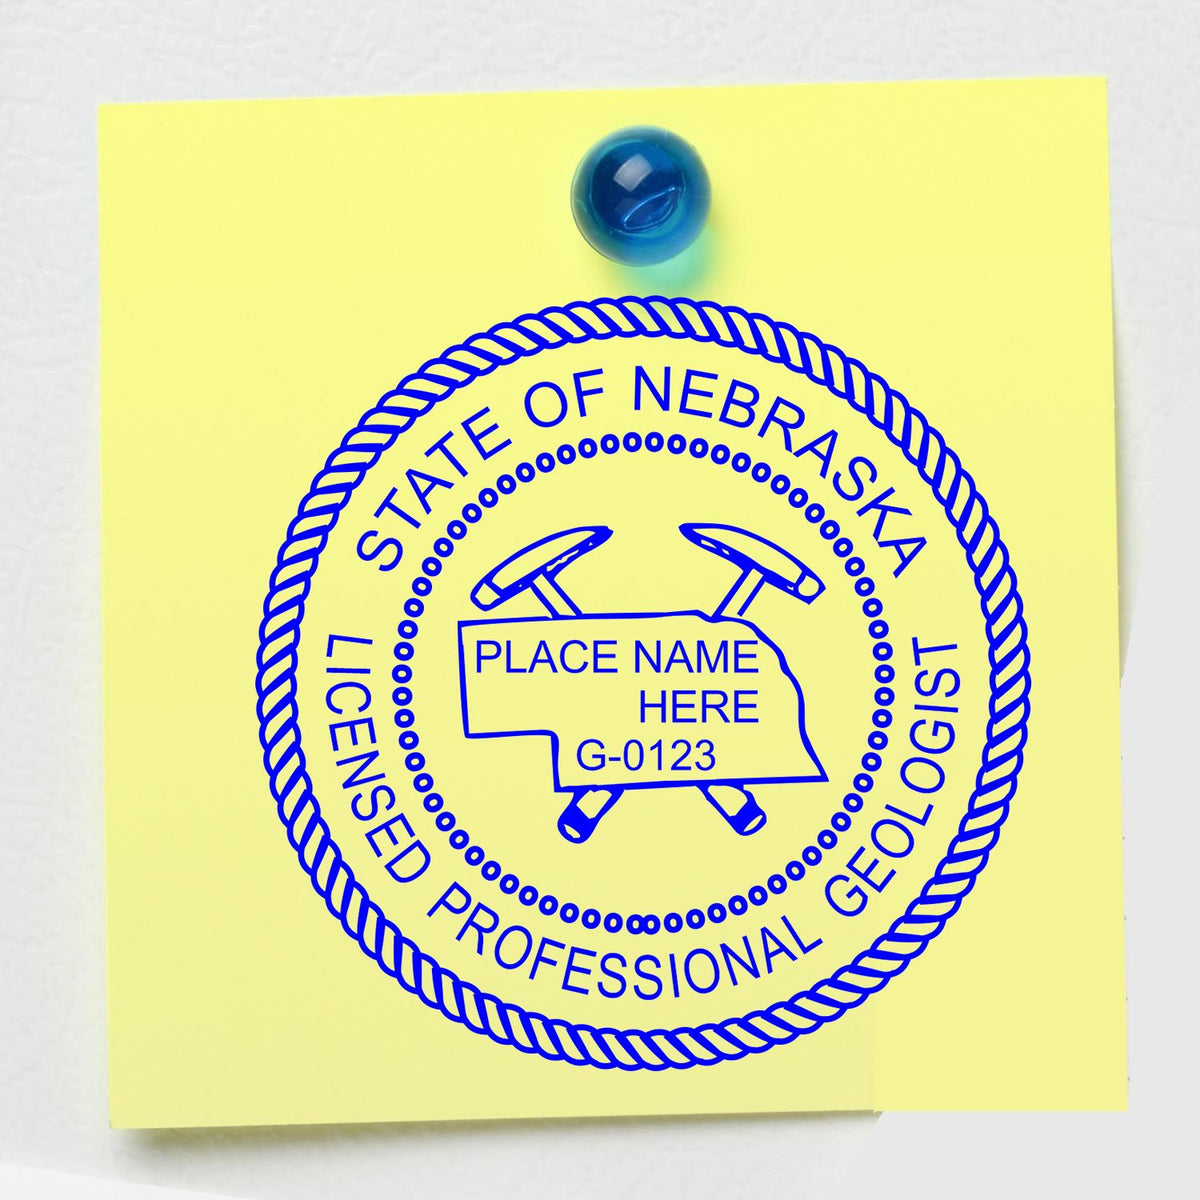 The Slim Pre-Inked Nebraska Professional Geologist Seal Stamp stamp impression comes to life with a crisp, detailed image stamped on paper - showcasing true professional quality.